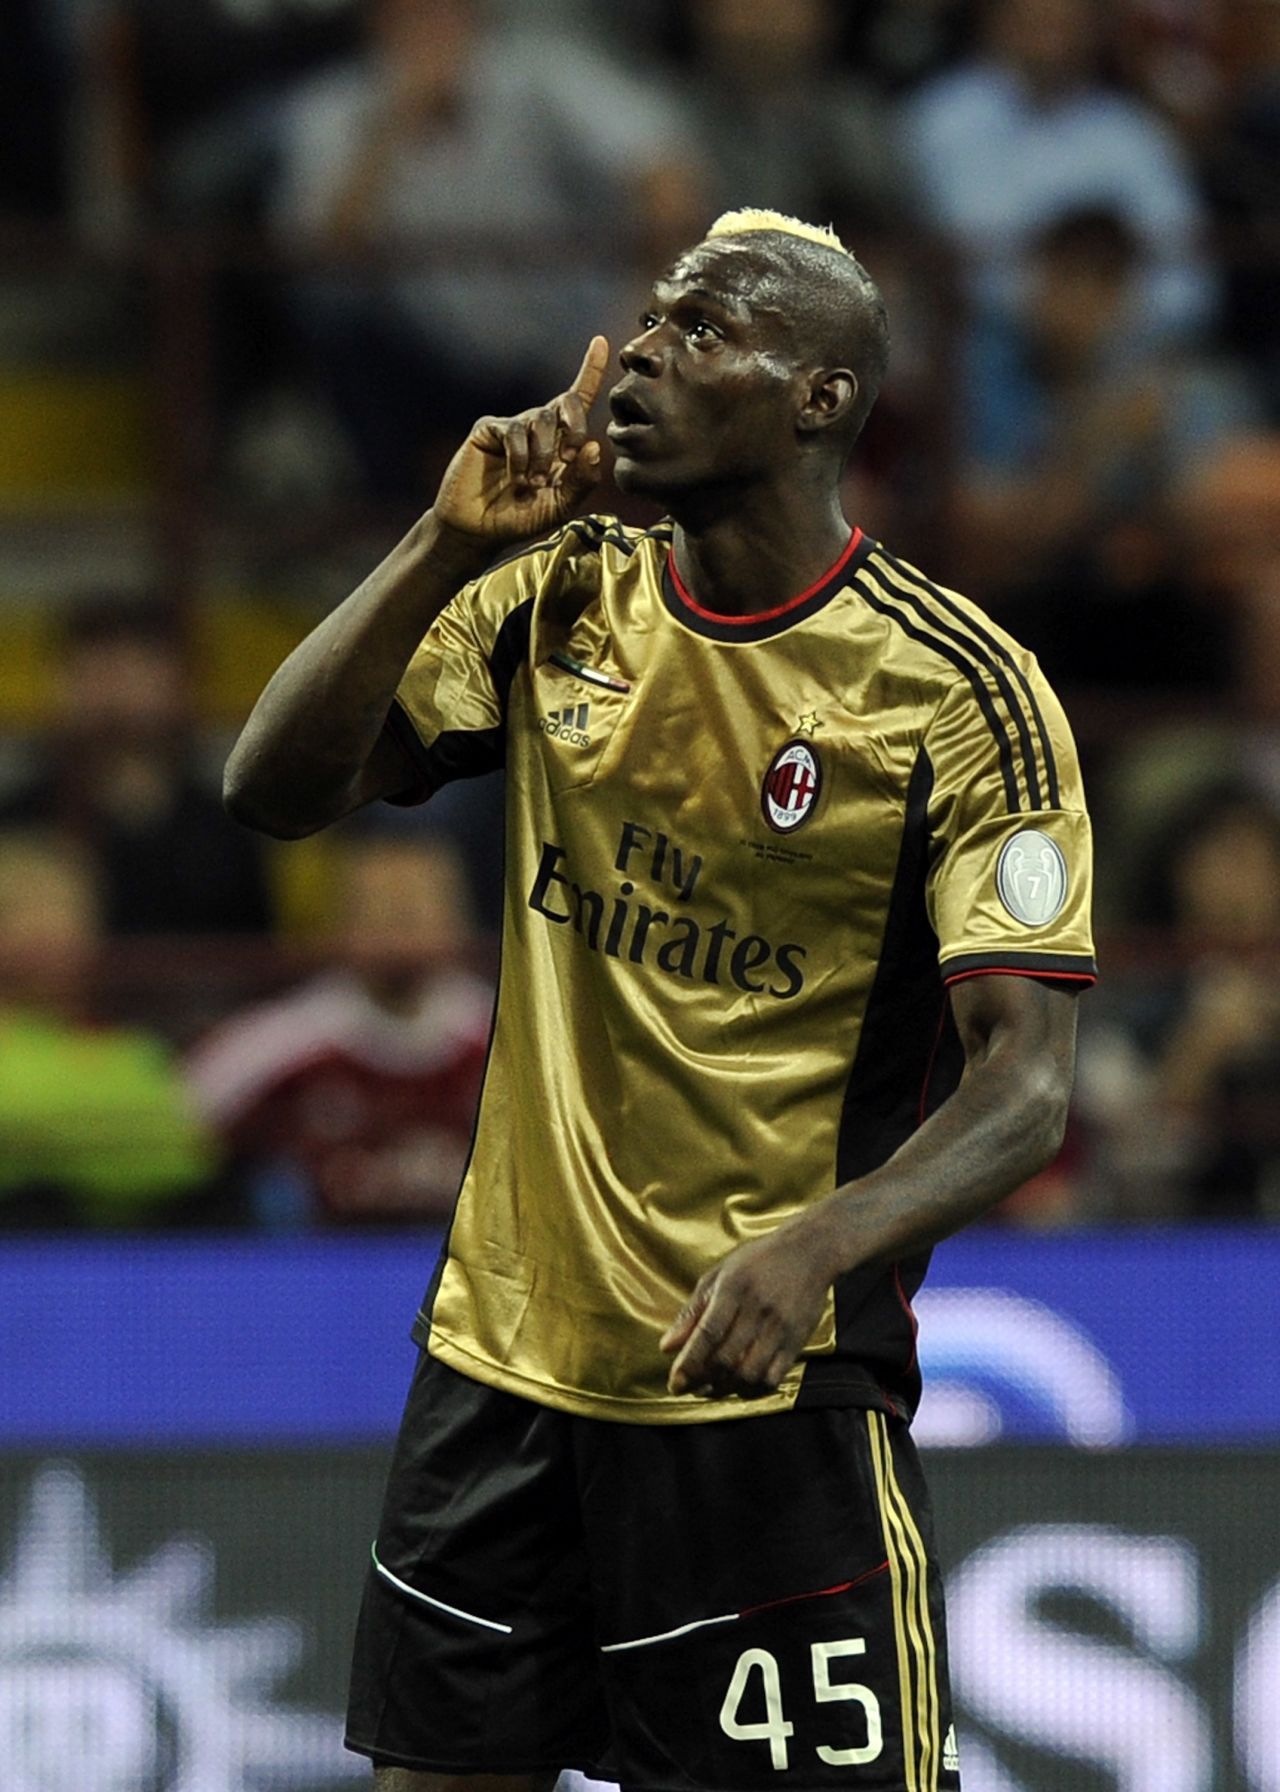 AC Milan's Mario Balotelli reacts to racist abuse from the visiting Roma fans at the San Siro in May 2013. It was not the first time the Italian-born striker has been racially abused in Serie A. Balotelli has since moved clubs and now plays for Liverpool in the Premier League.